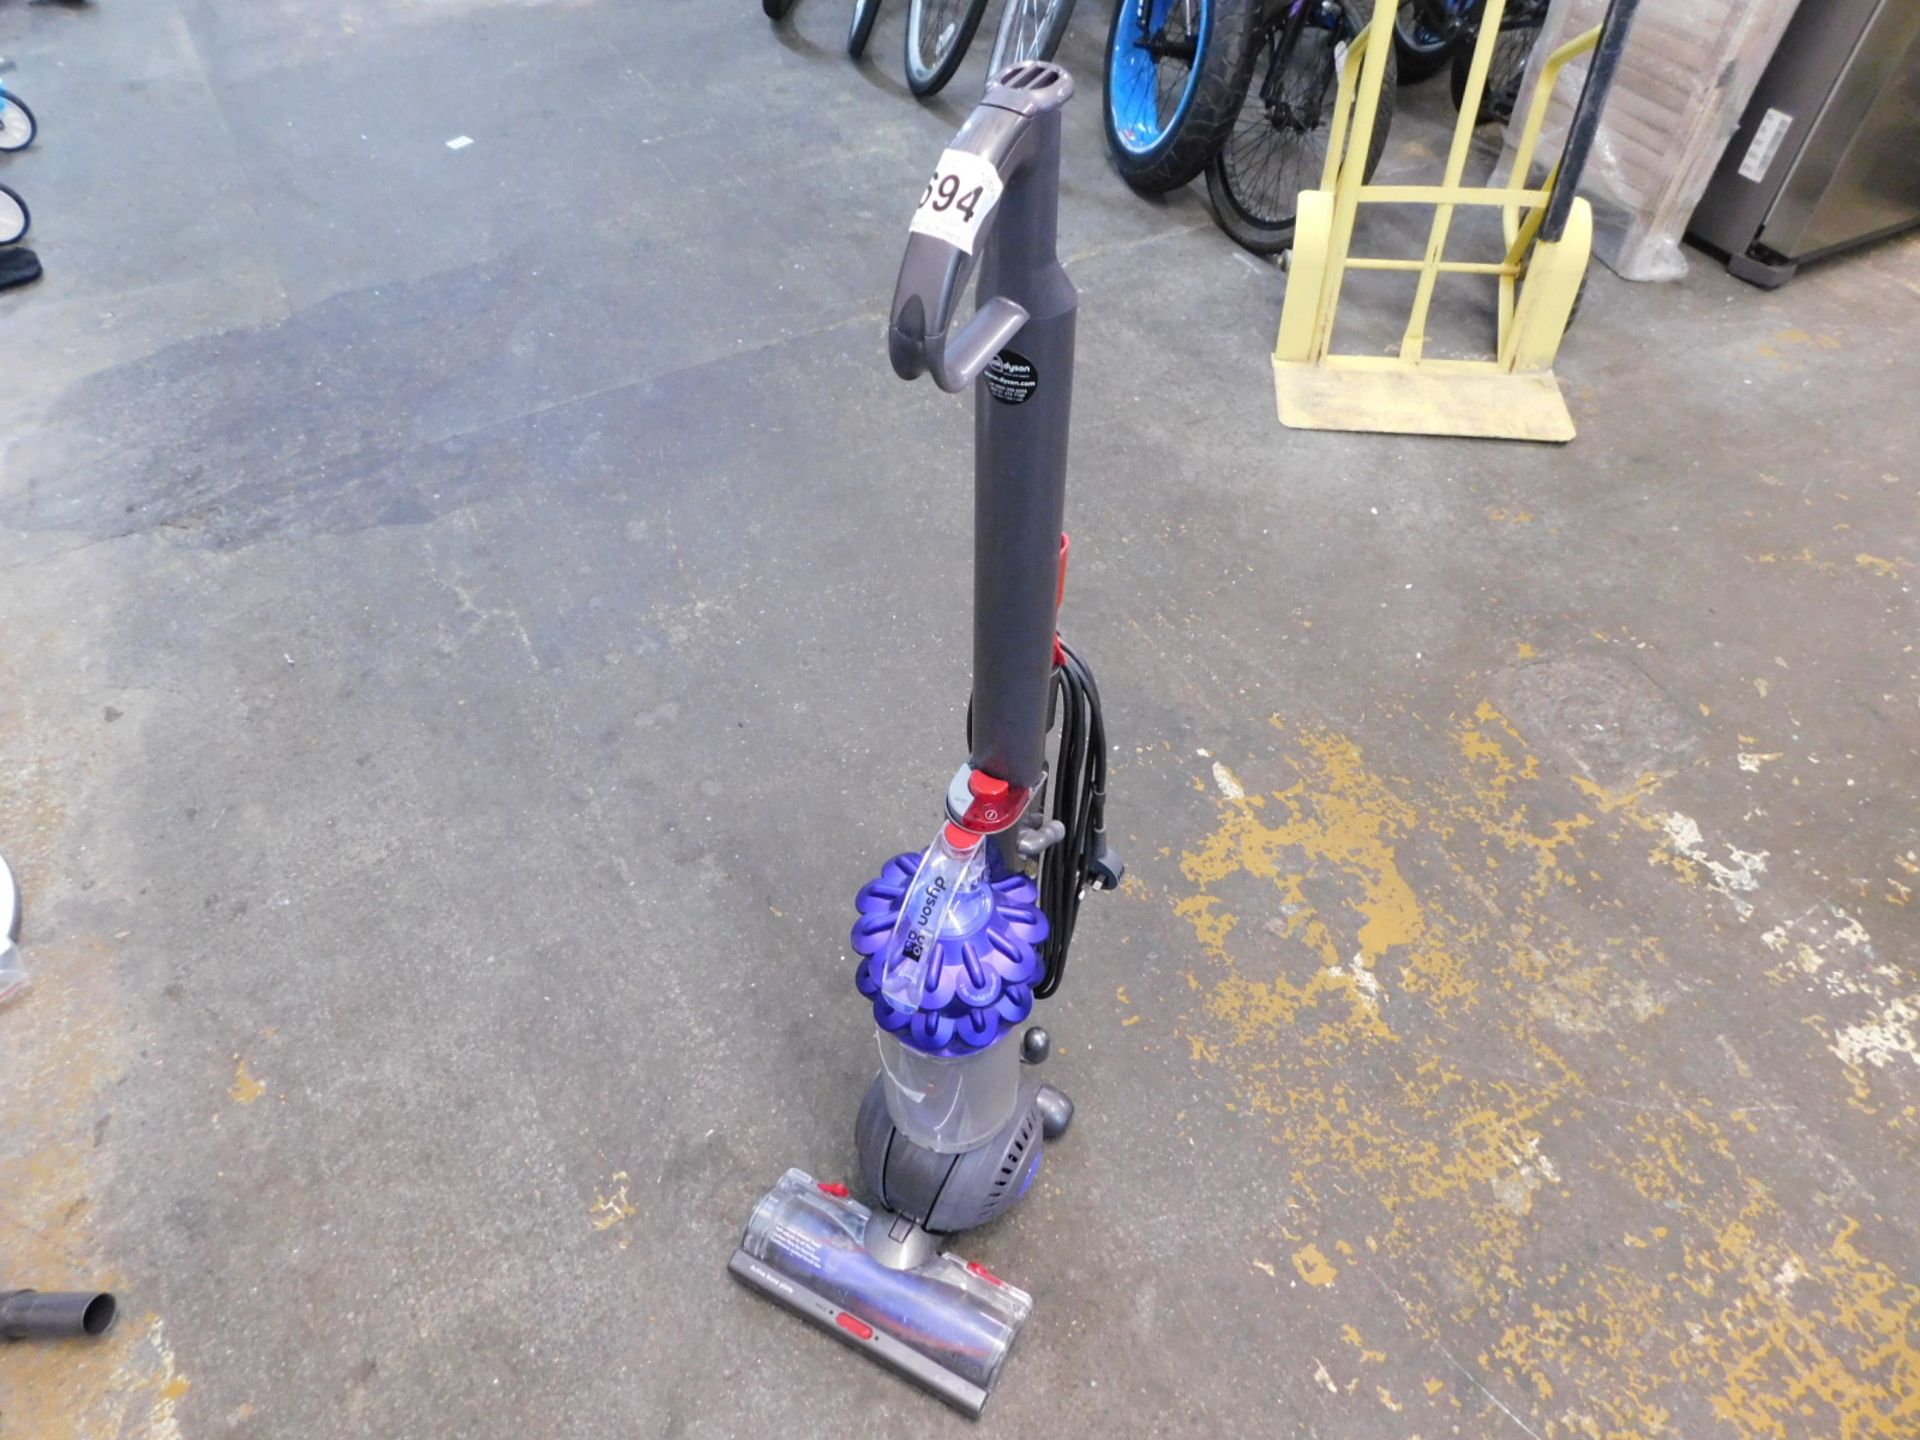 1 DYSON DC50 ANIMAL COMPACT UPRIGHT VACUUM CLEANER RRP £389.99